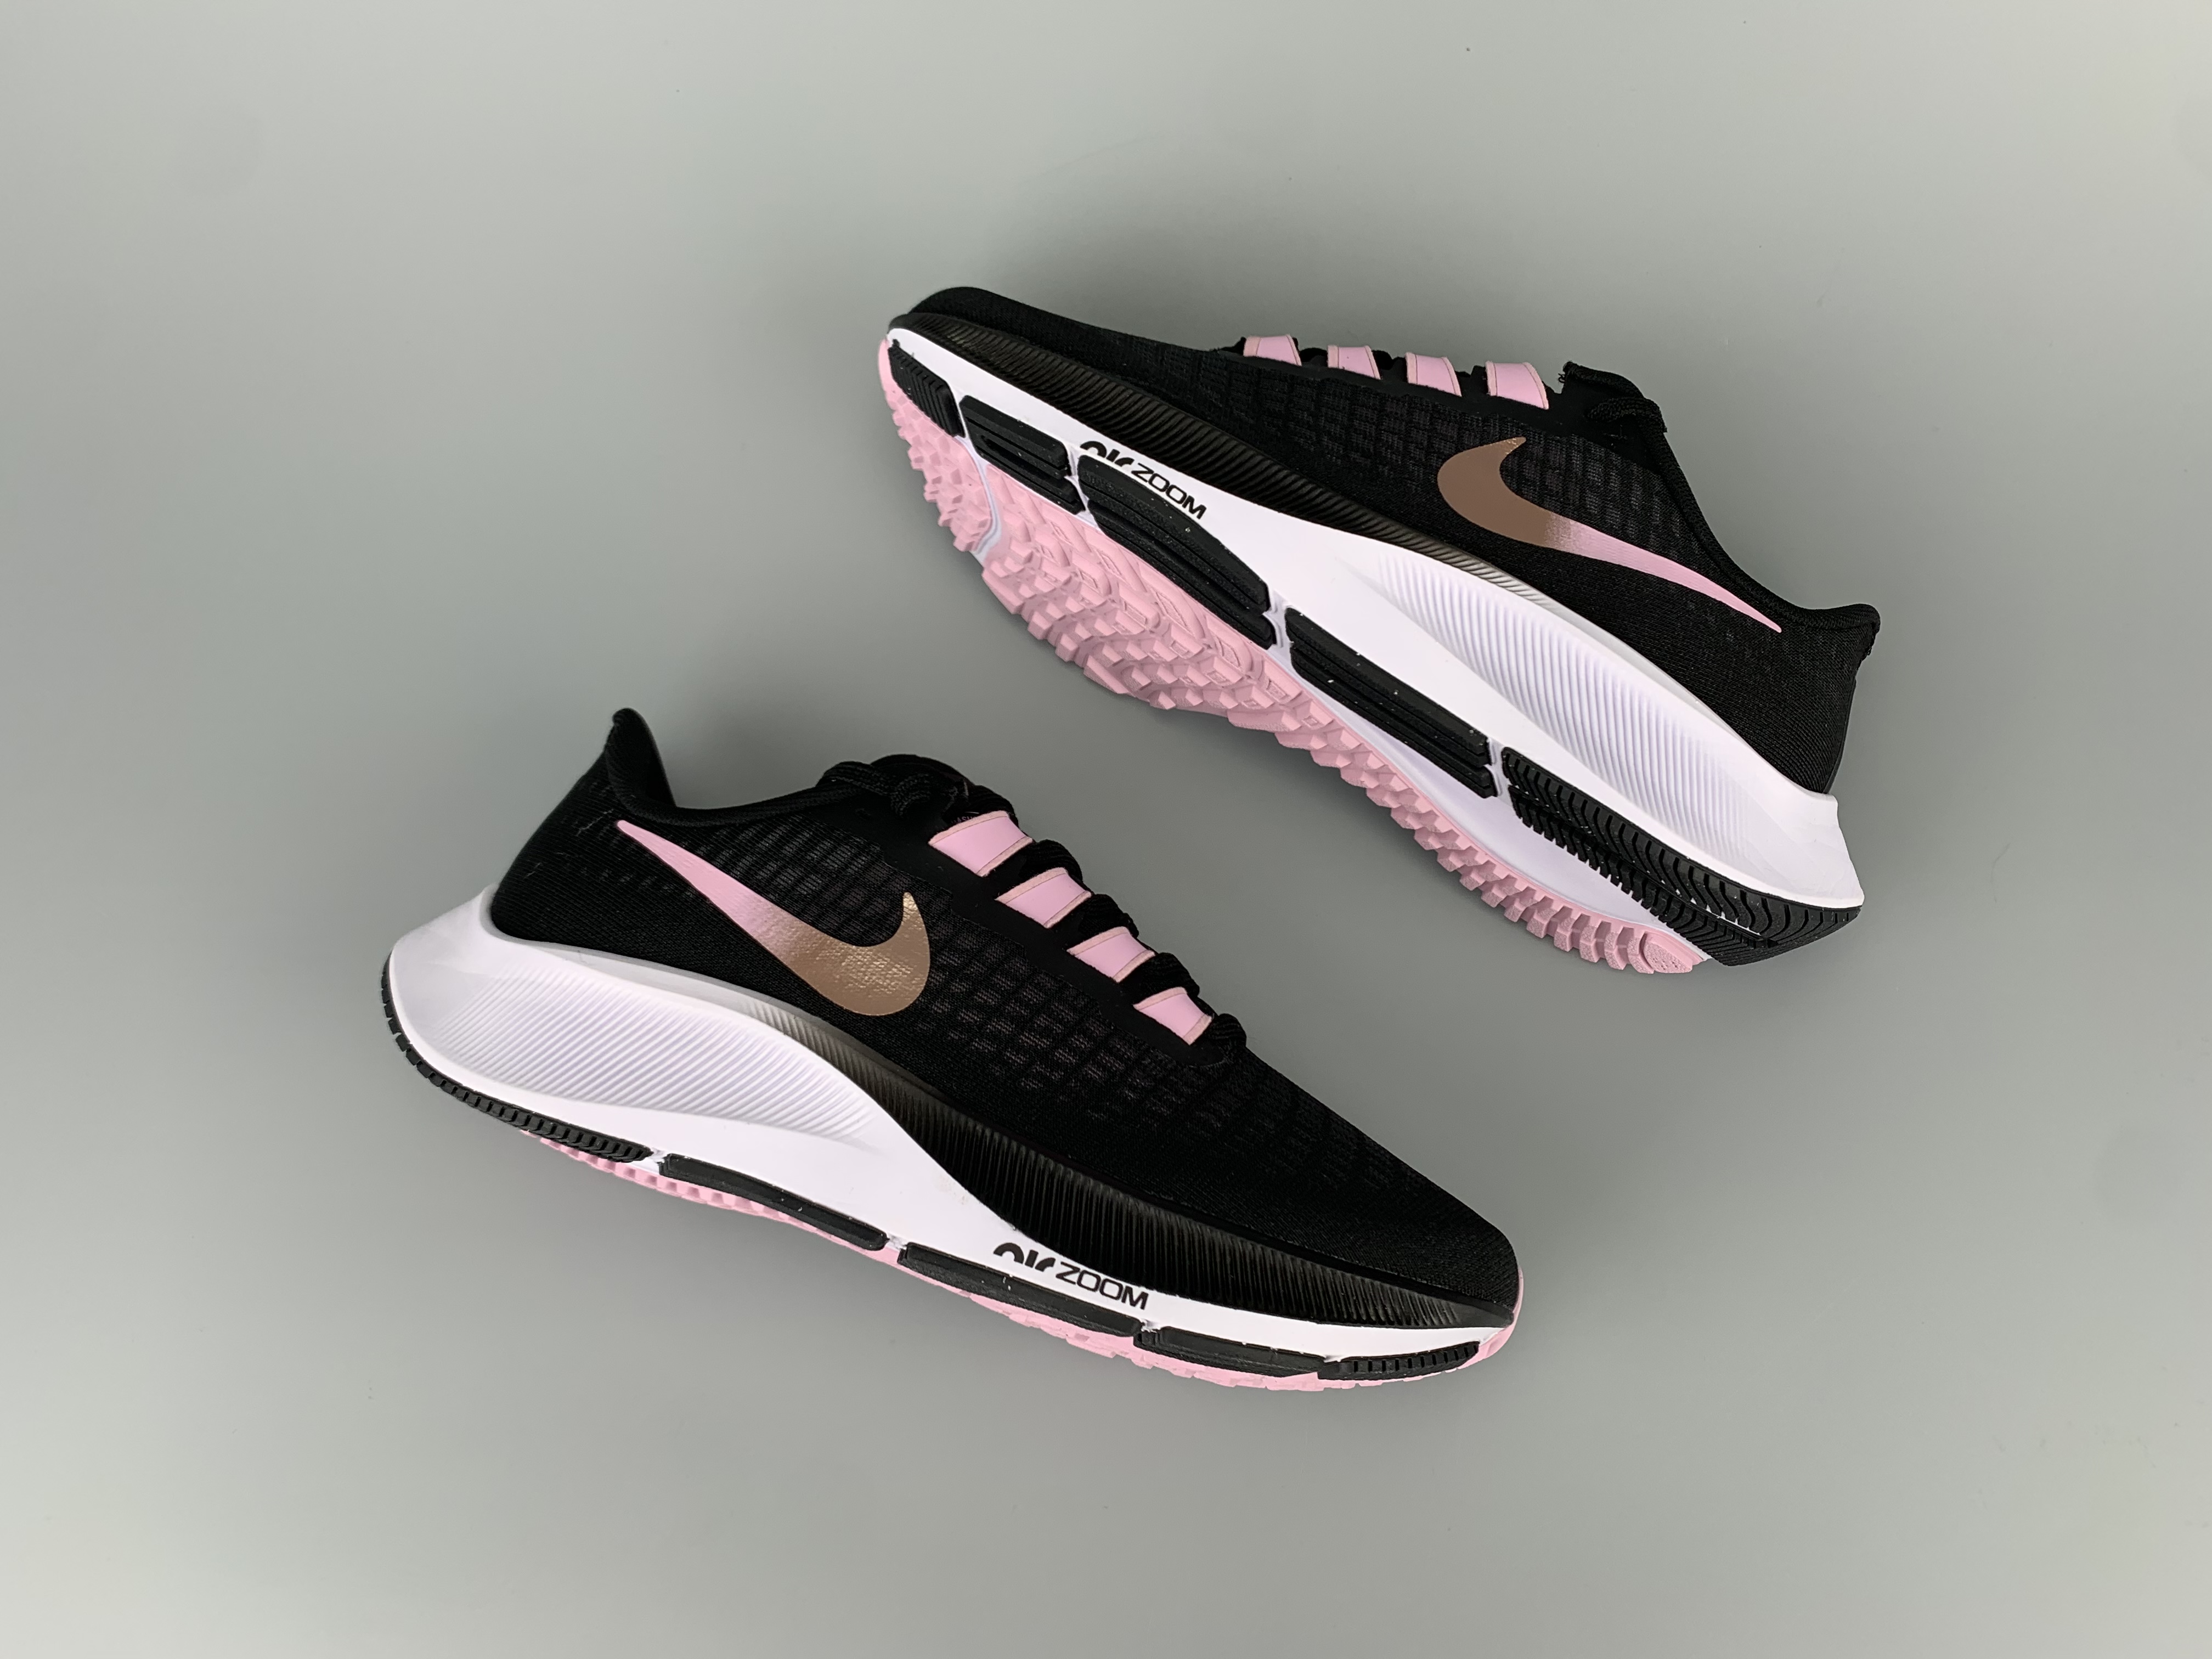 New Nike Zoom Pegasus 37 Black Rose Gold Pink Running Shoes For Women - Click Image to Close